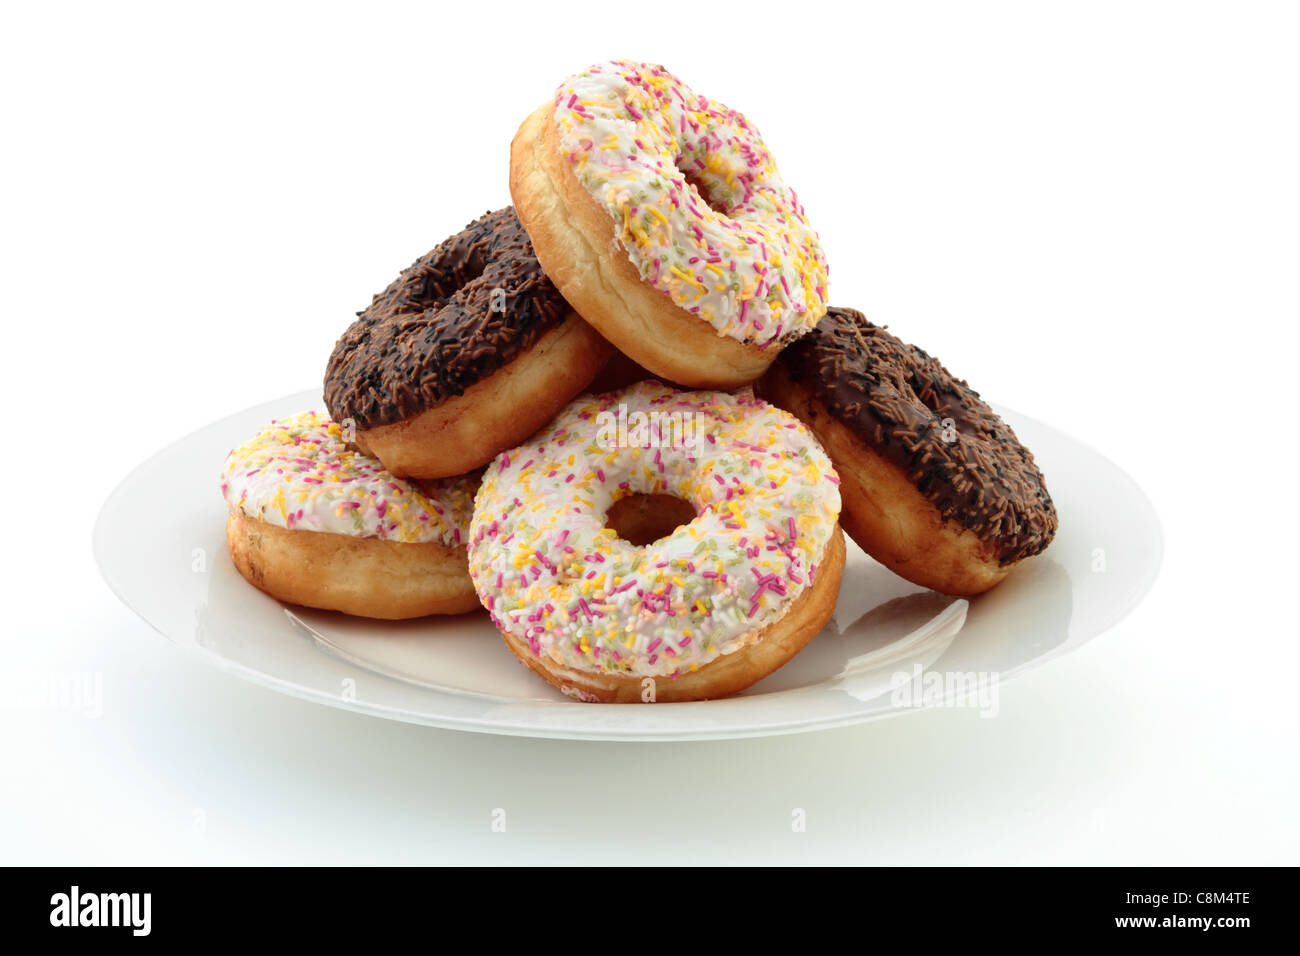 a-pile-of-iced-donuts-or-doughnuts-on-a-plate-isolated-on-a-white-C8M4TE.jpg